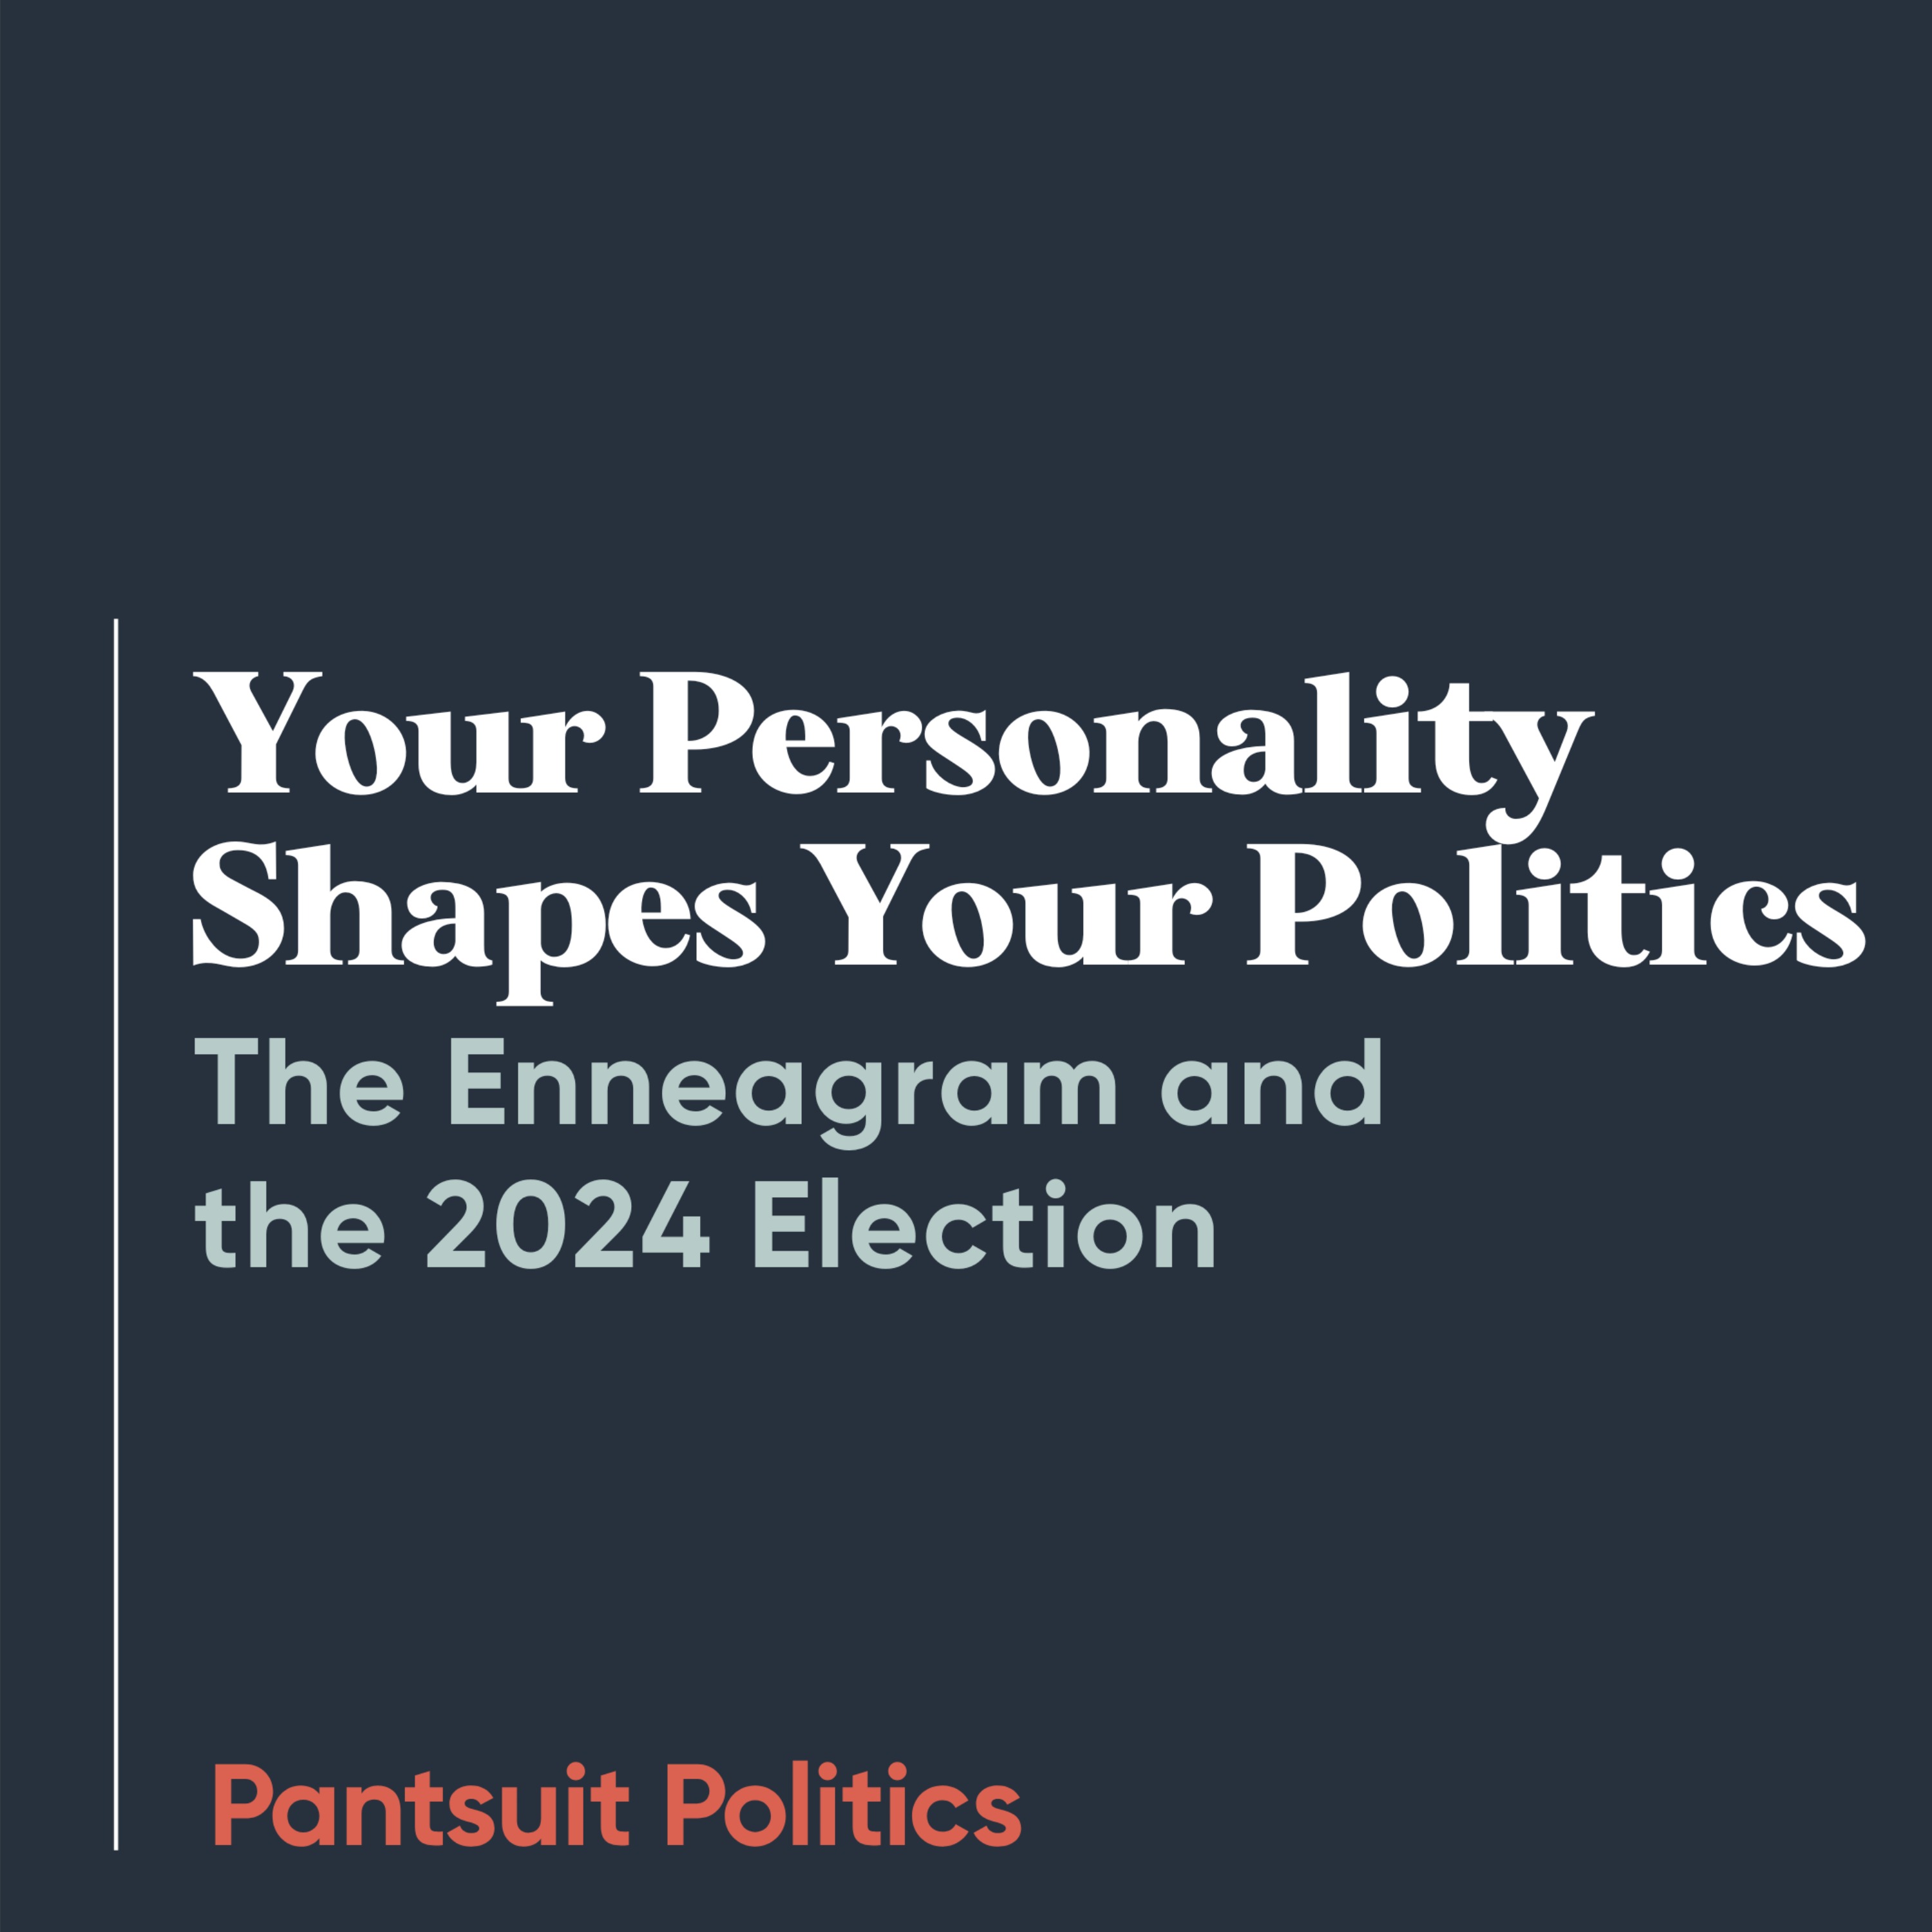 Your Personality Shapes Your Politics: The Enneagram and the 2024 Election